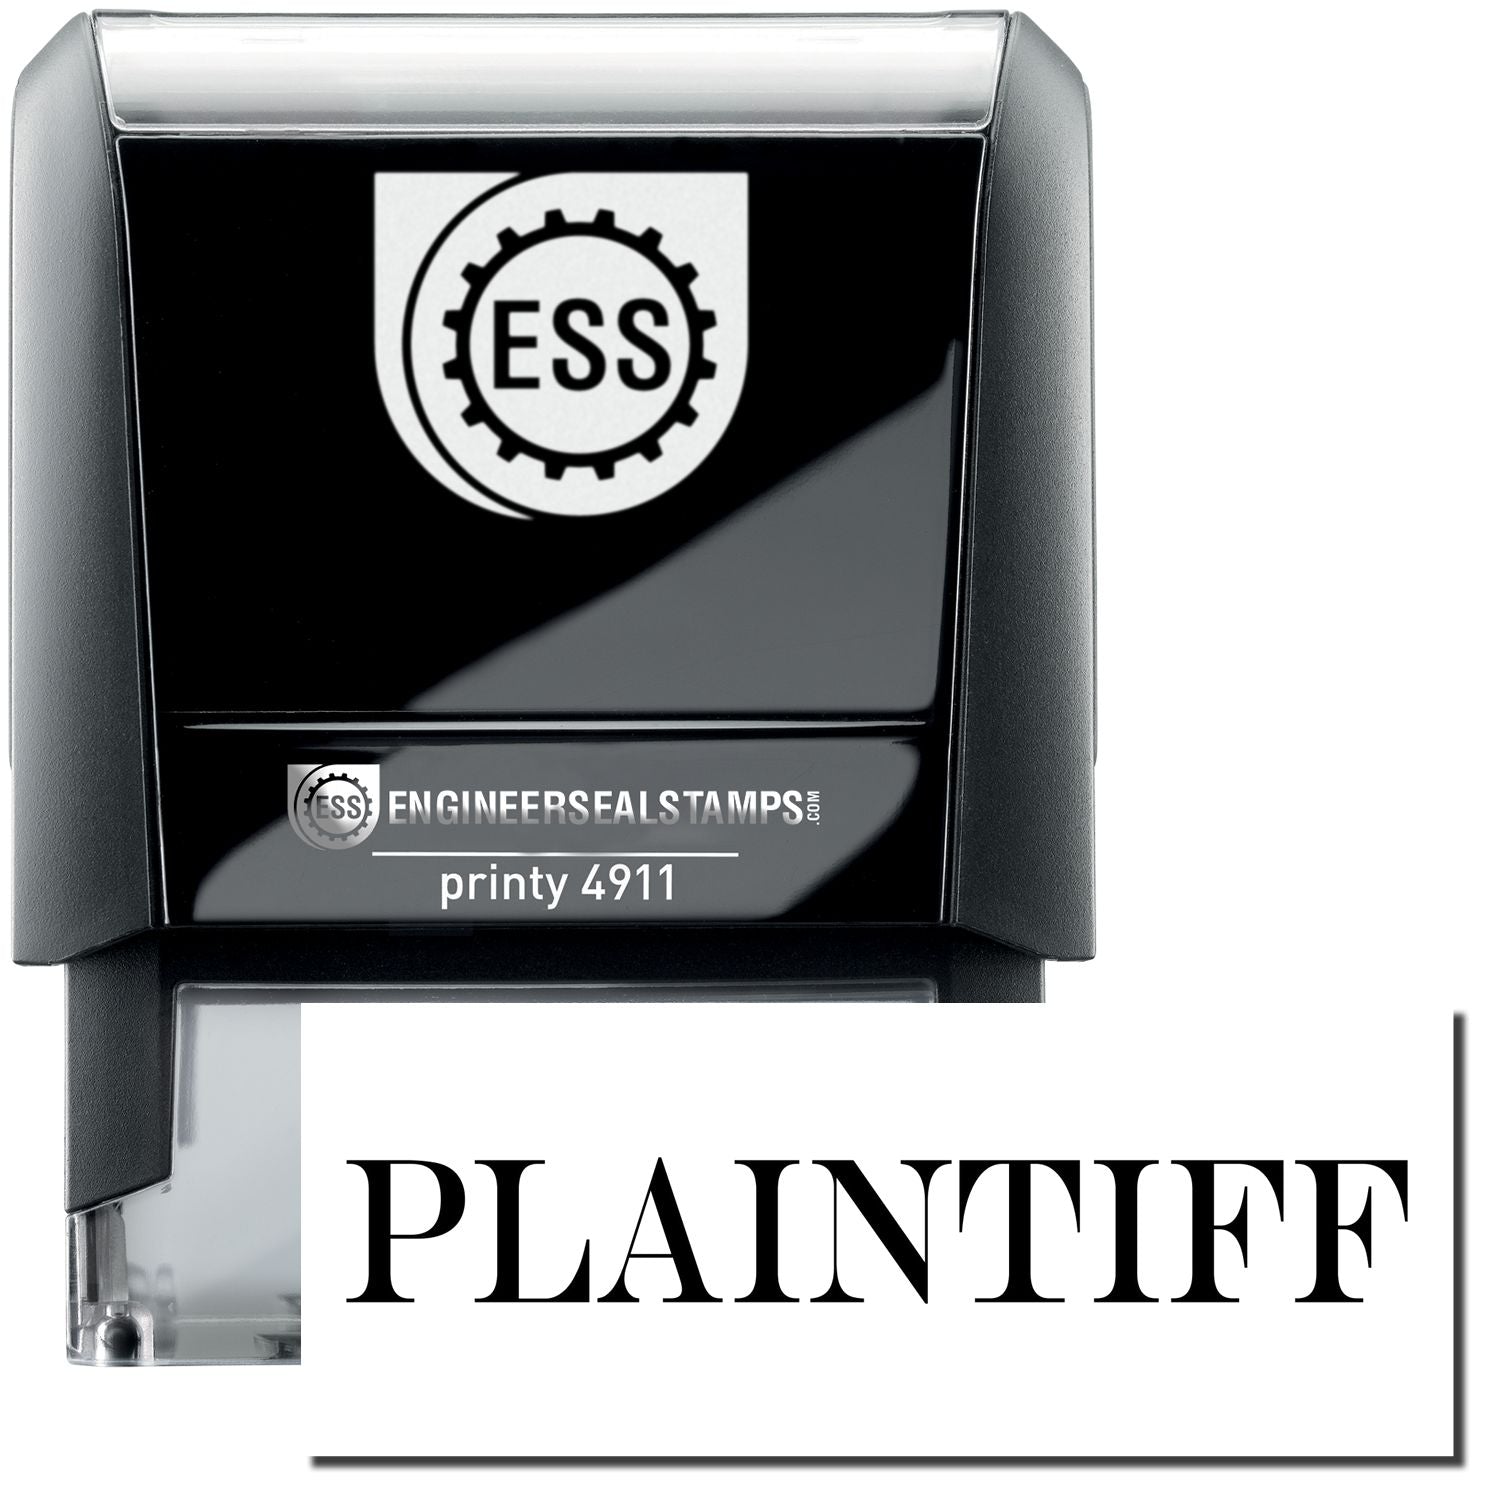 A self-inking stamp with a stamped image showing how the text "PLAINTIFF" is displayed after stamping.